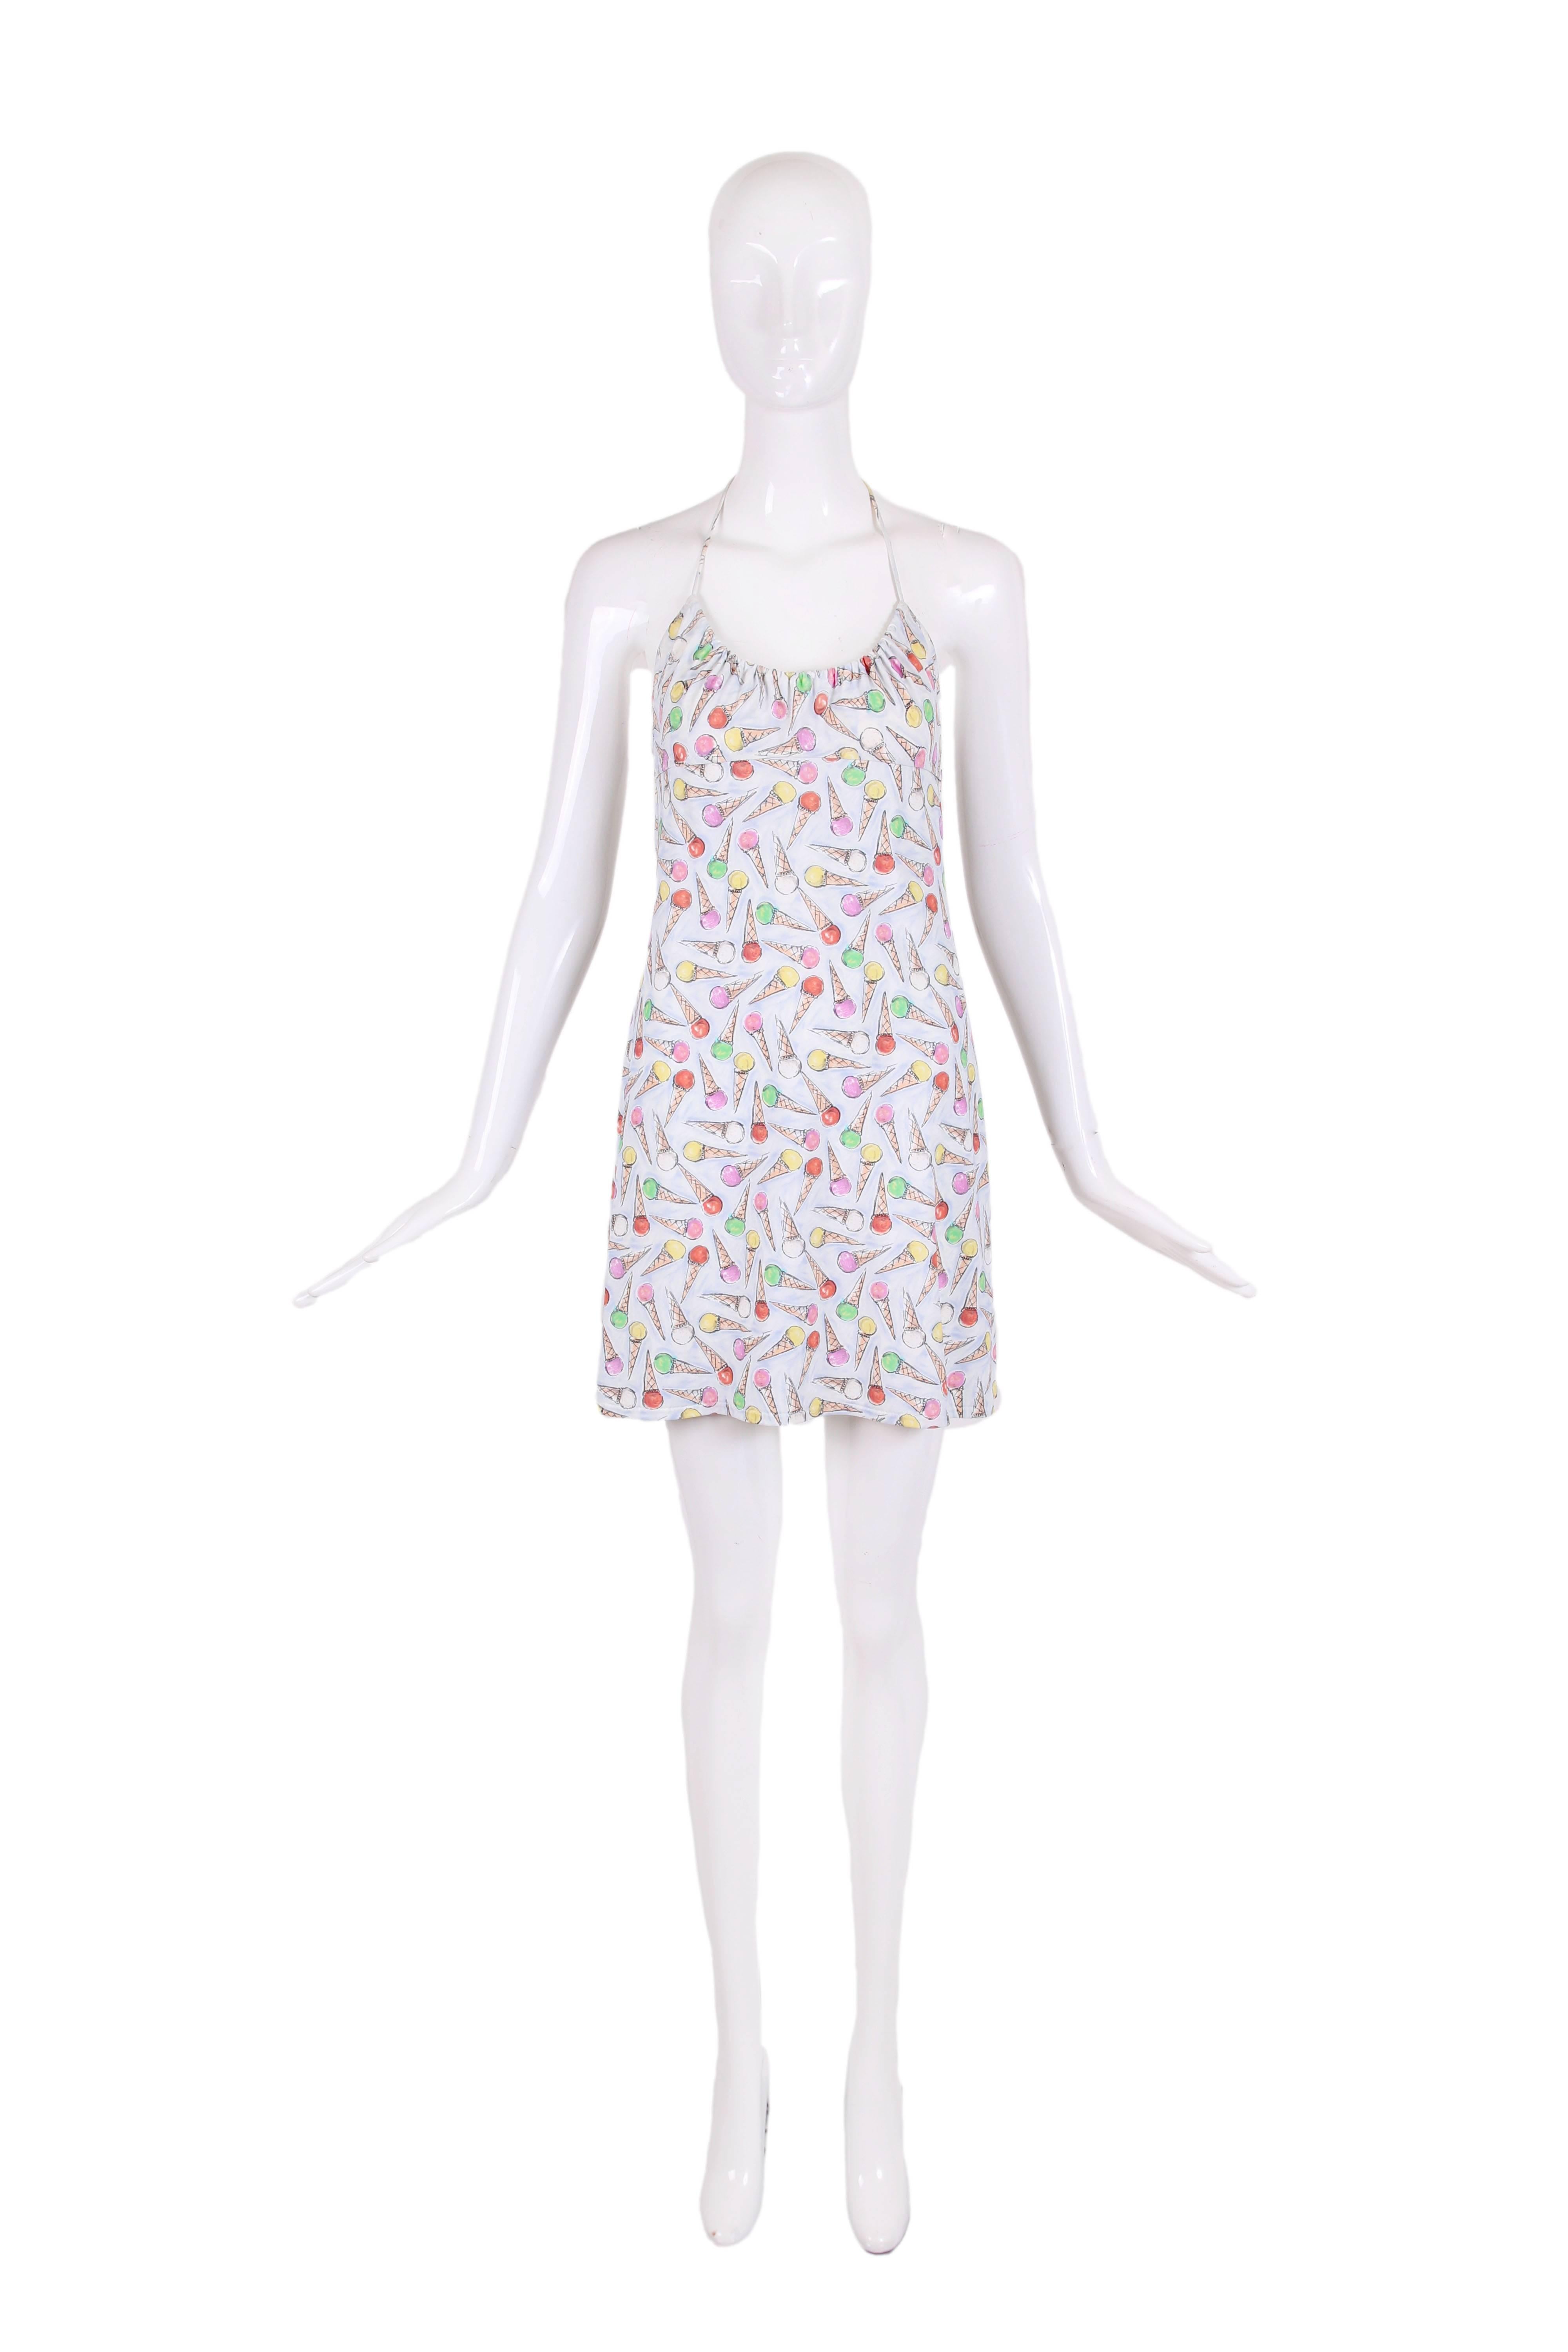 2004C Chanel spandex & nylon blend stretch halter mini dress with a multi-colored ice cream cone print on a light blue background. Neckline is gathered and can be made smaller or larger and has ties with a green and pink plastic CC logo ball at each